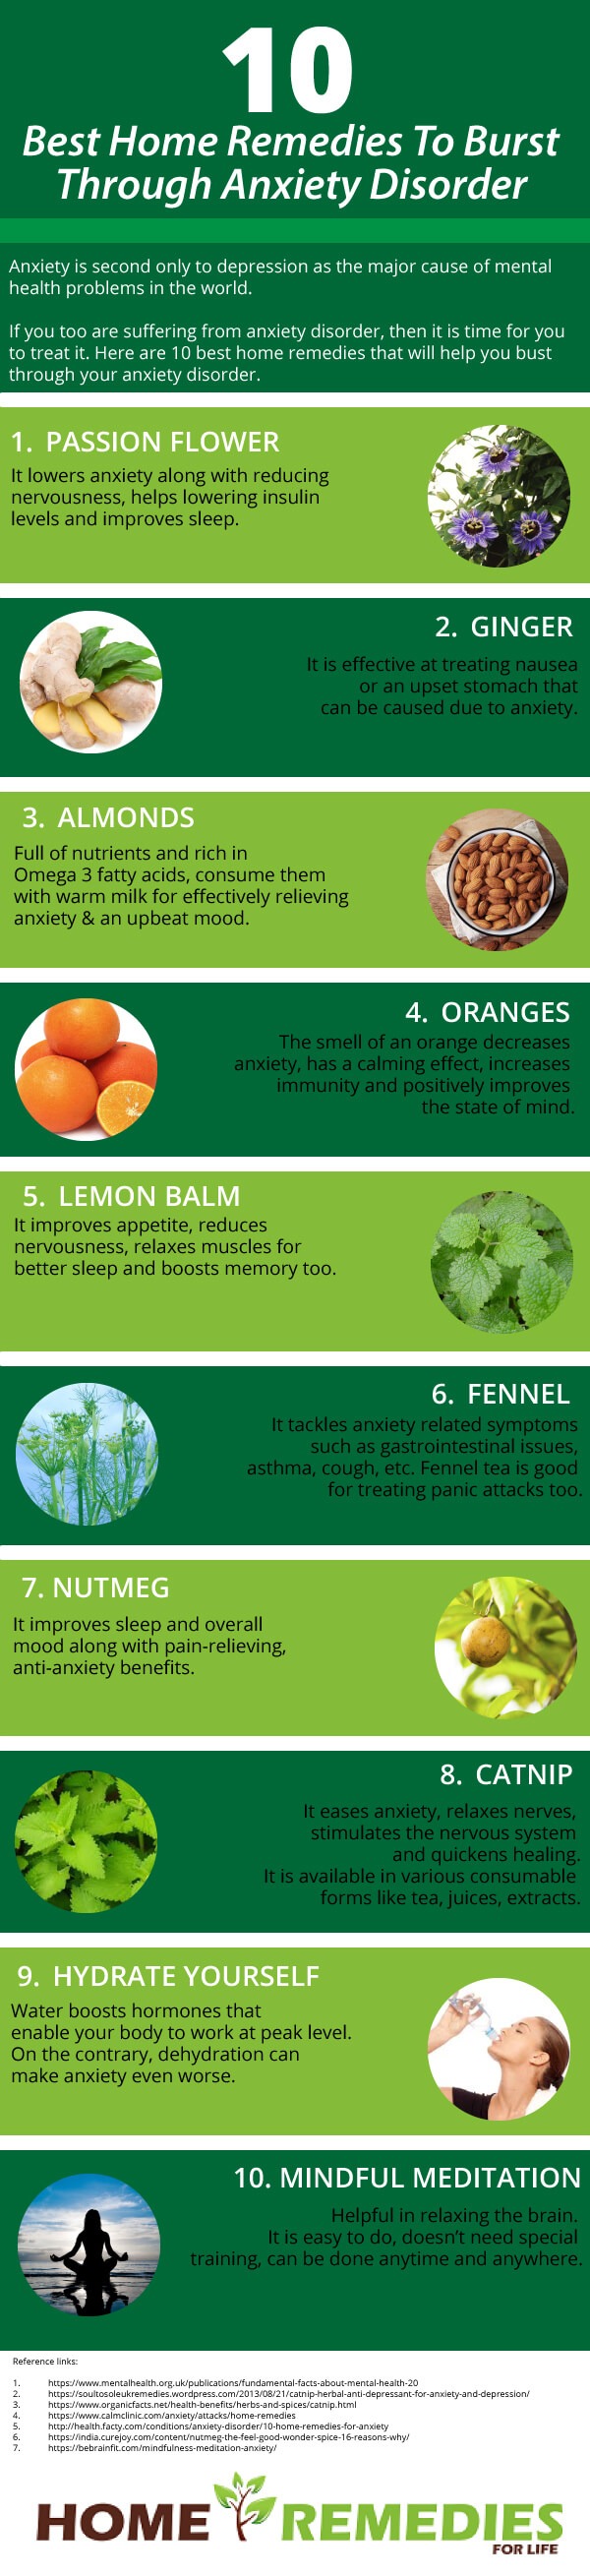 10-best-home-remedies-bust-anxiety-disorder